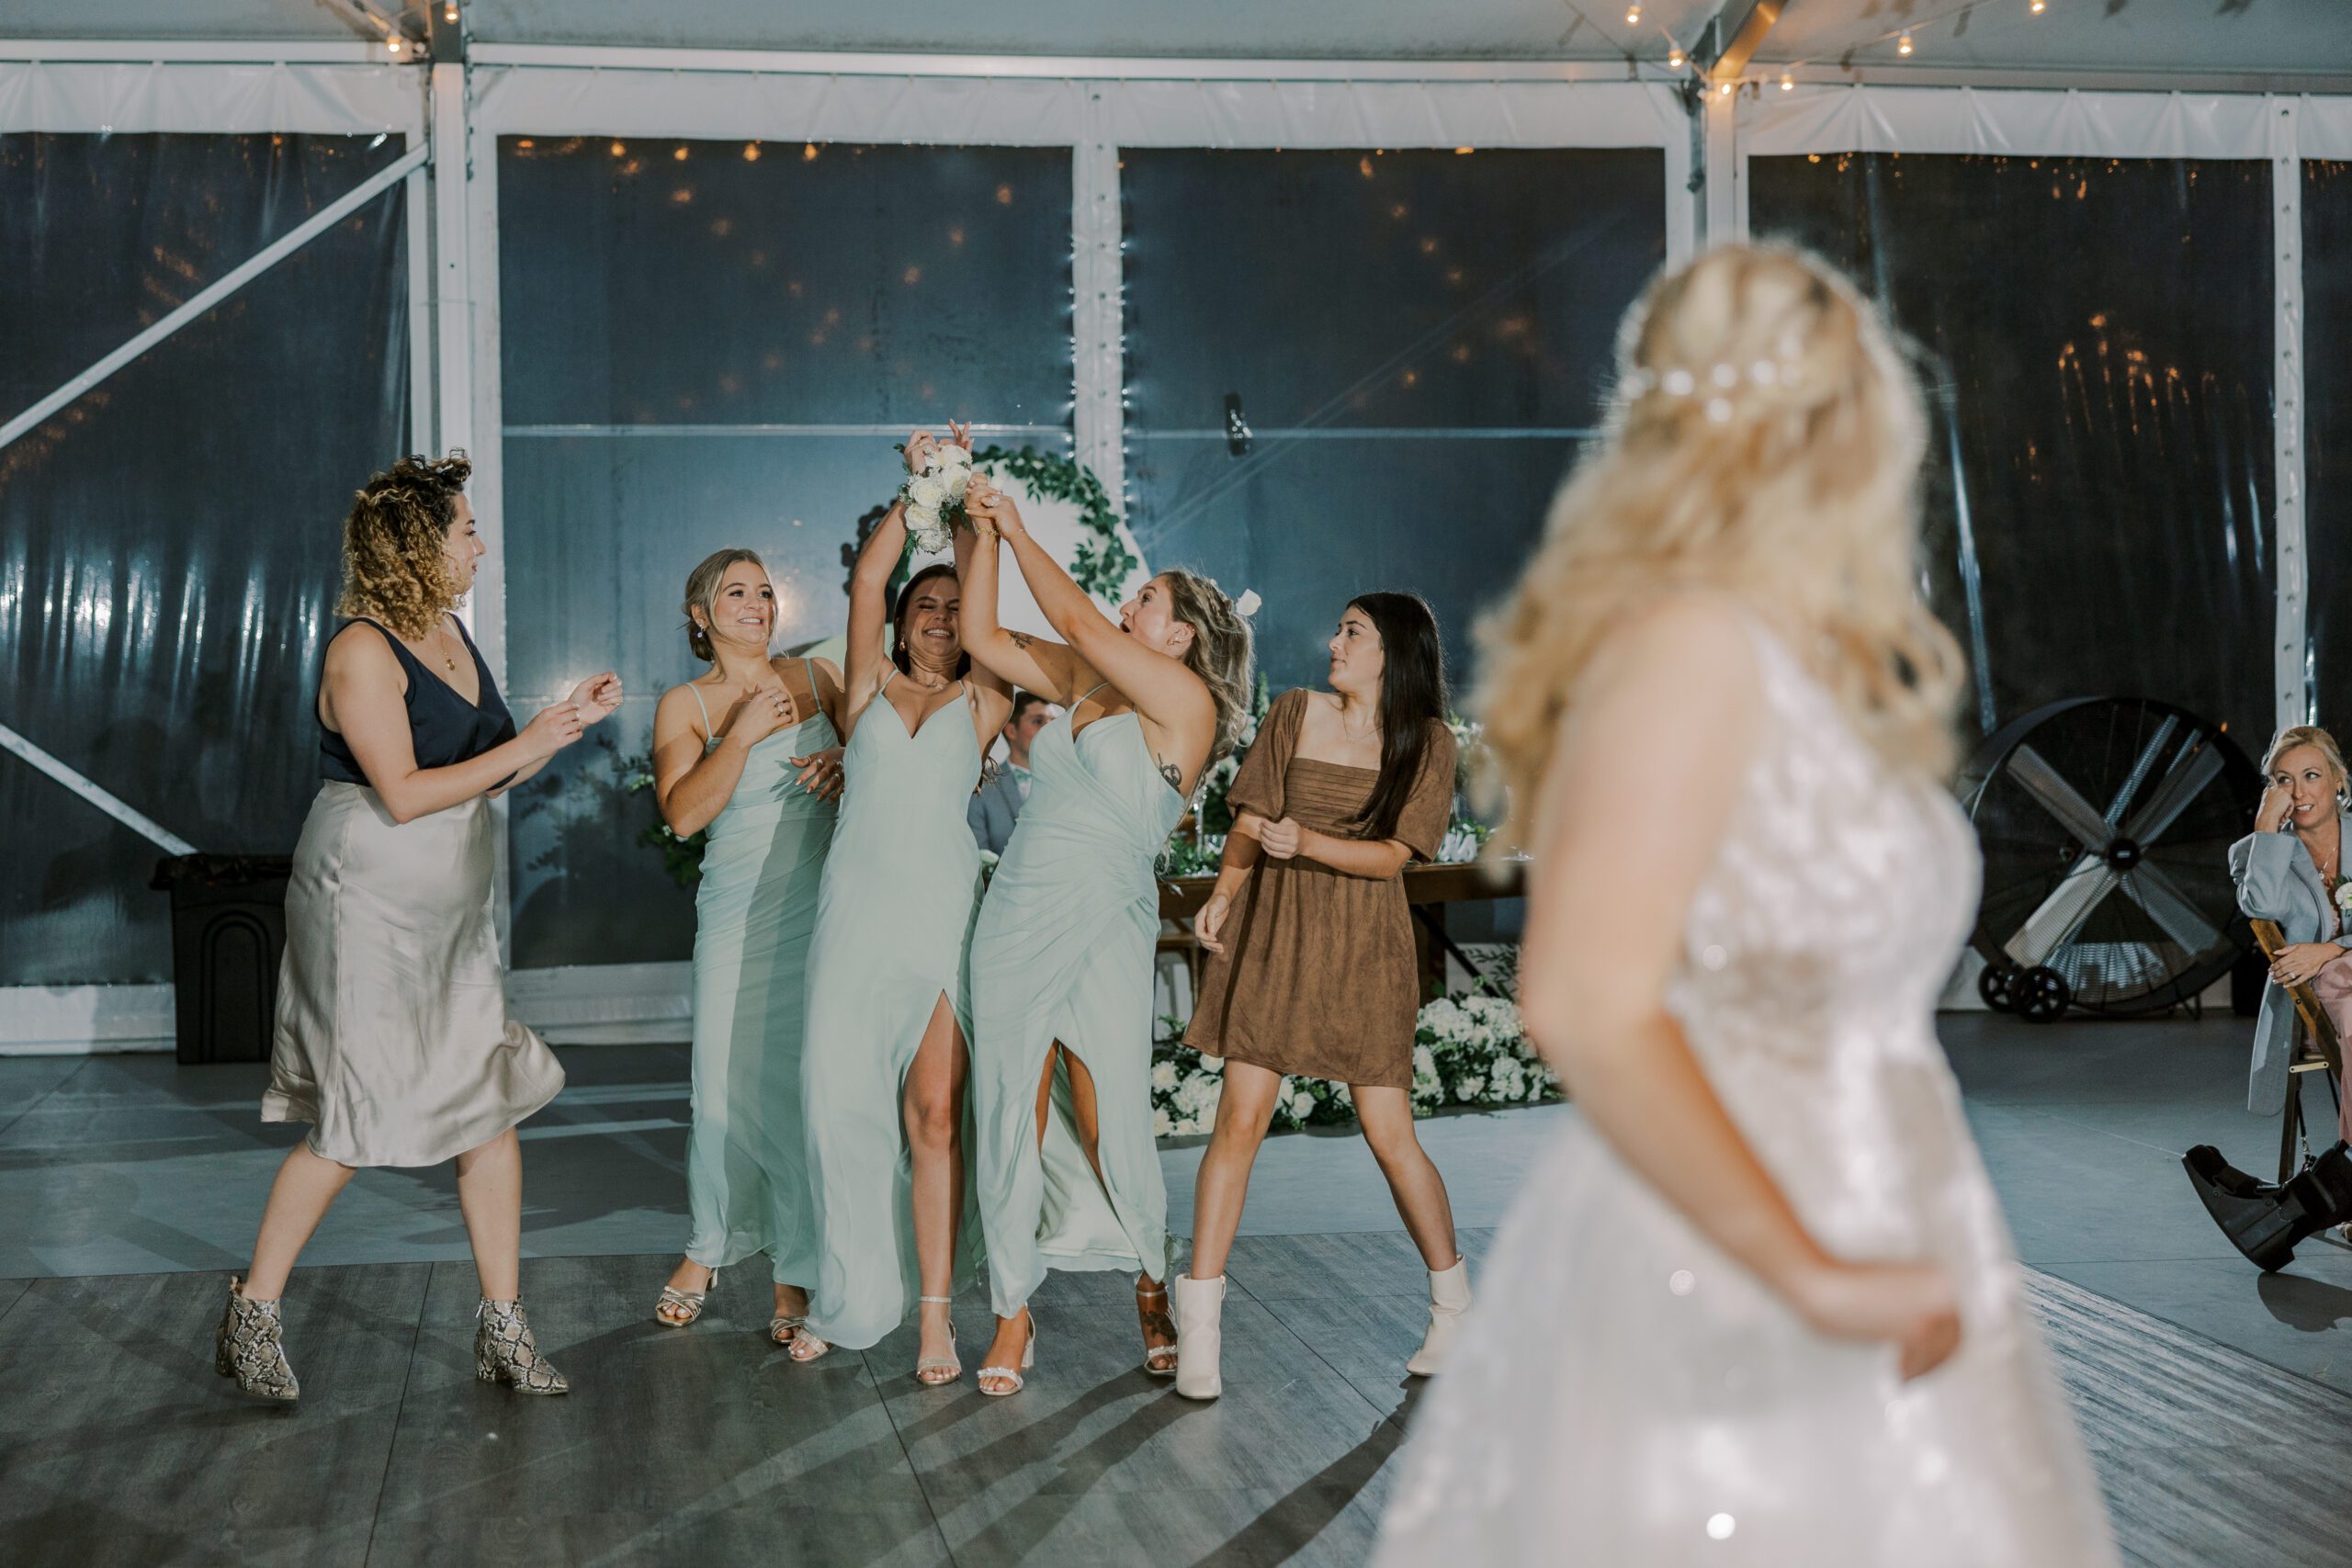 Bridesmaid catching the bouquet as a couple other guests and bridesmaids stand nearby